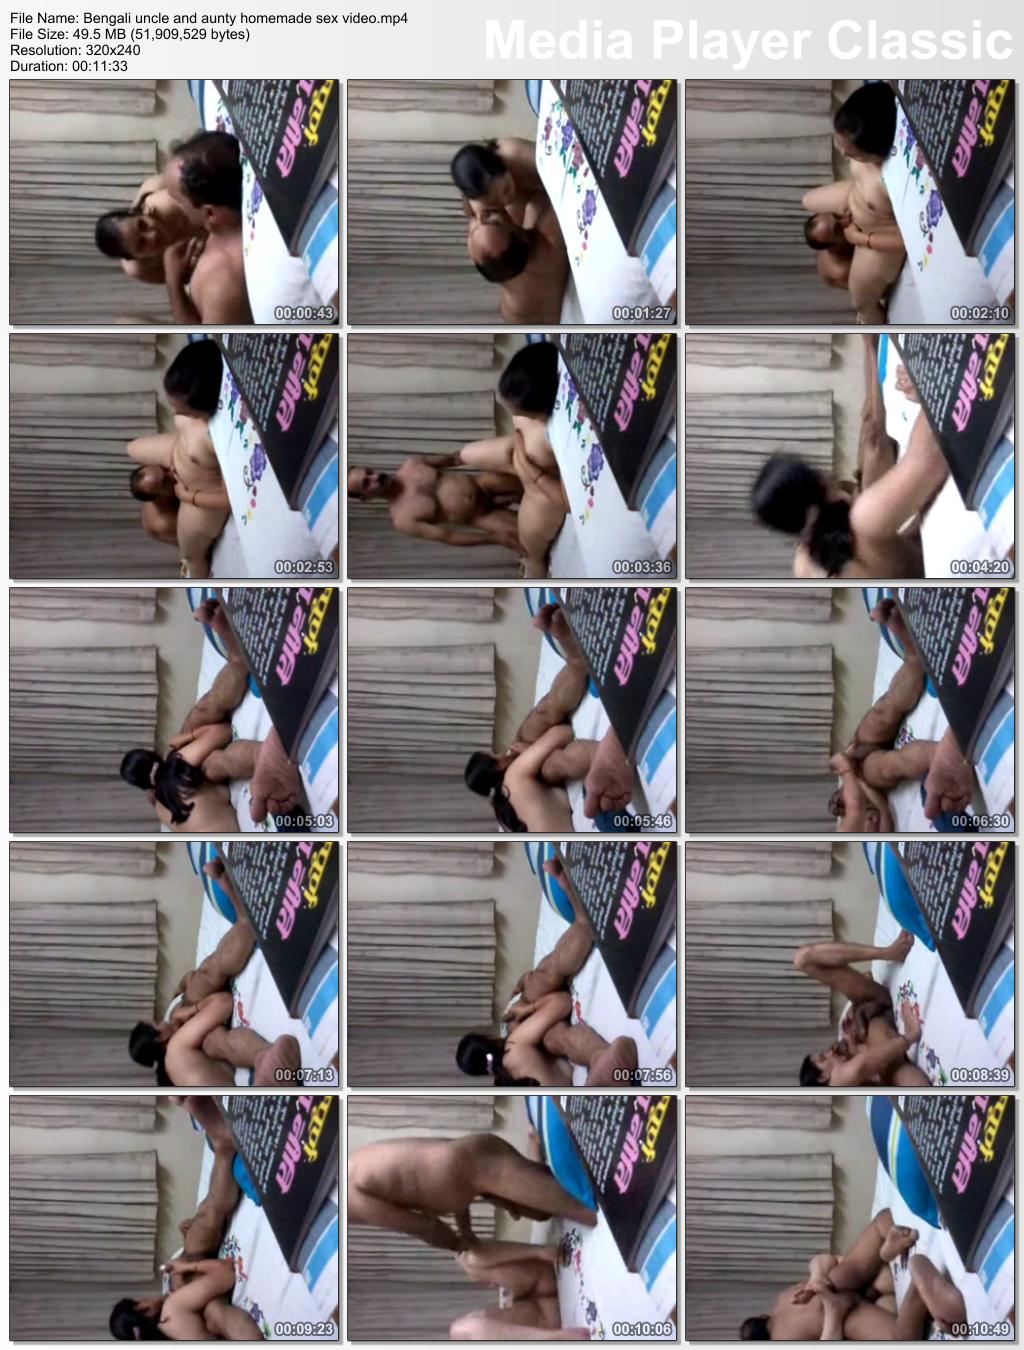 Bengali+uncle+and+aunty+homemade+sex+video.mp4_thumbs_%5B2014.05.05_09.54.46%5D.jpg